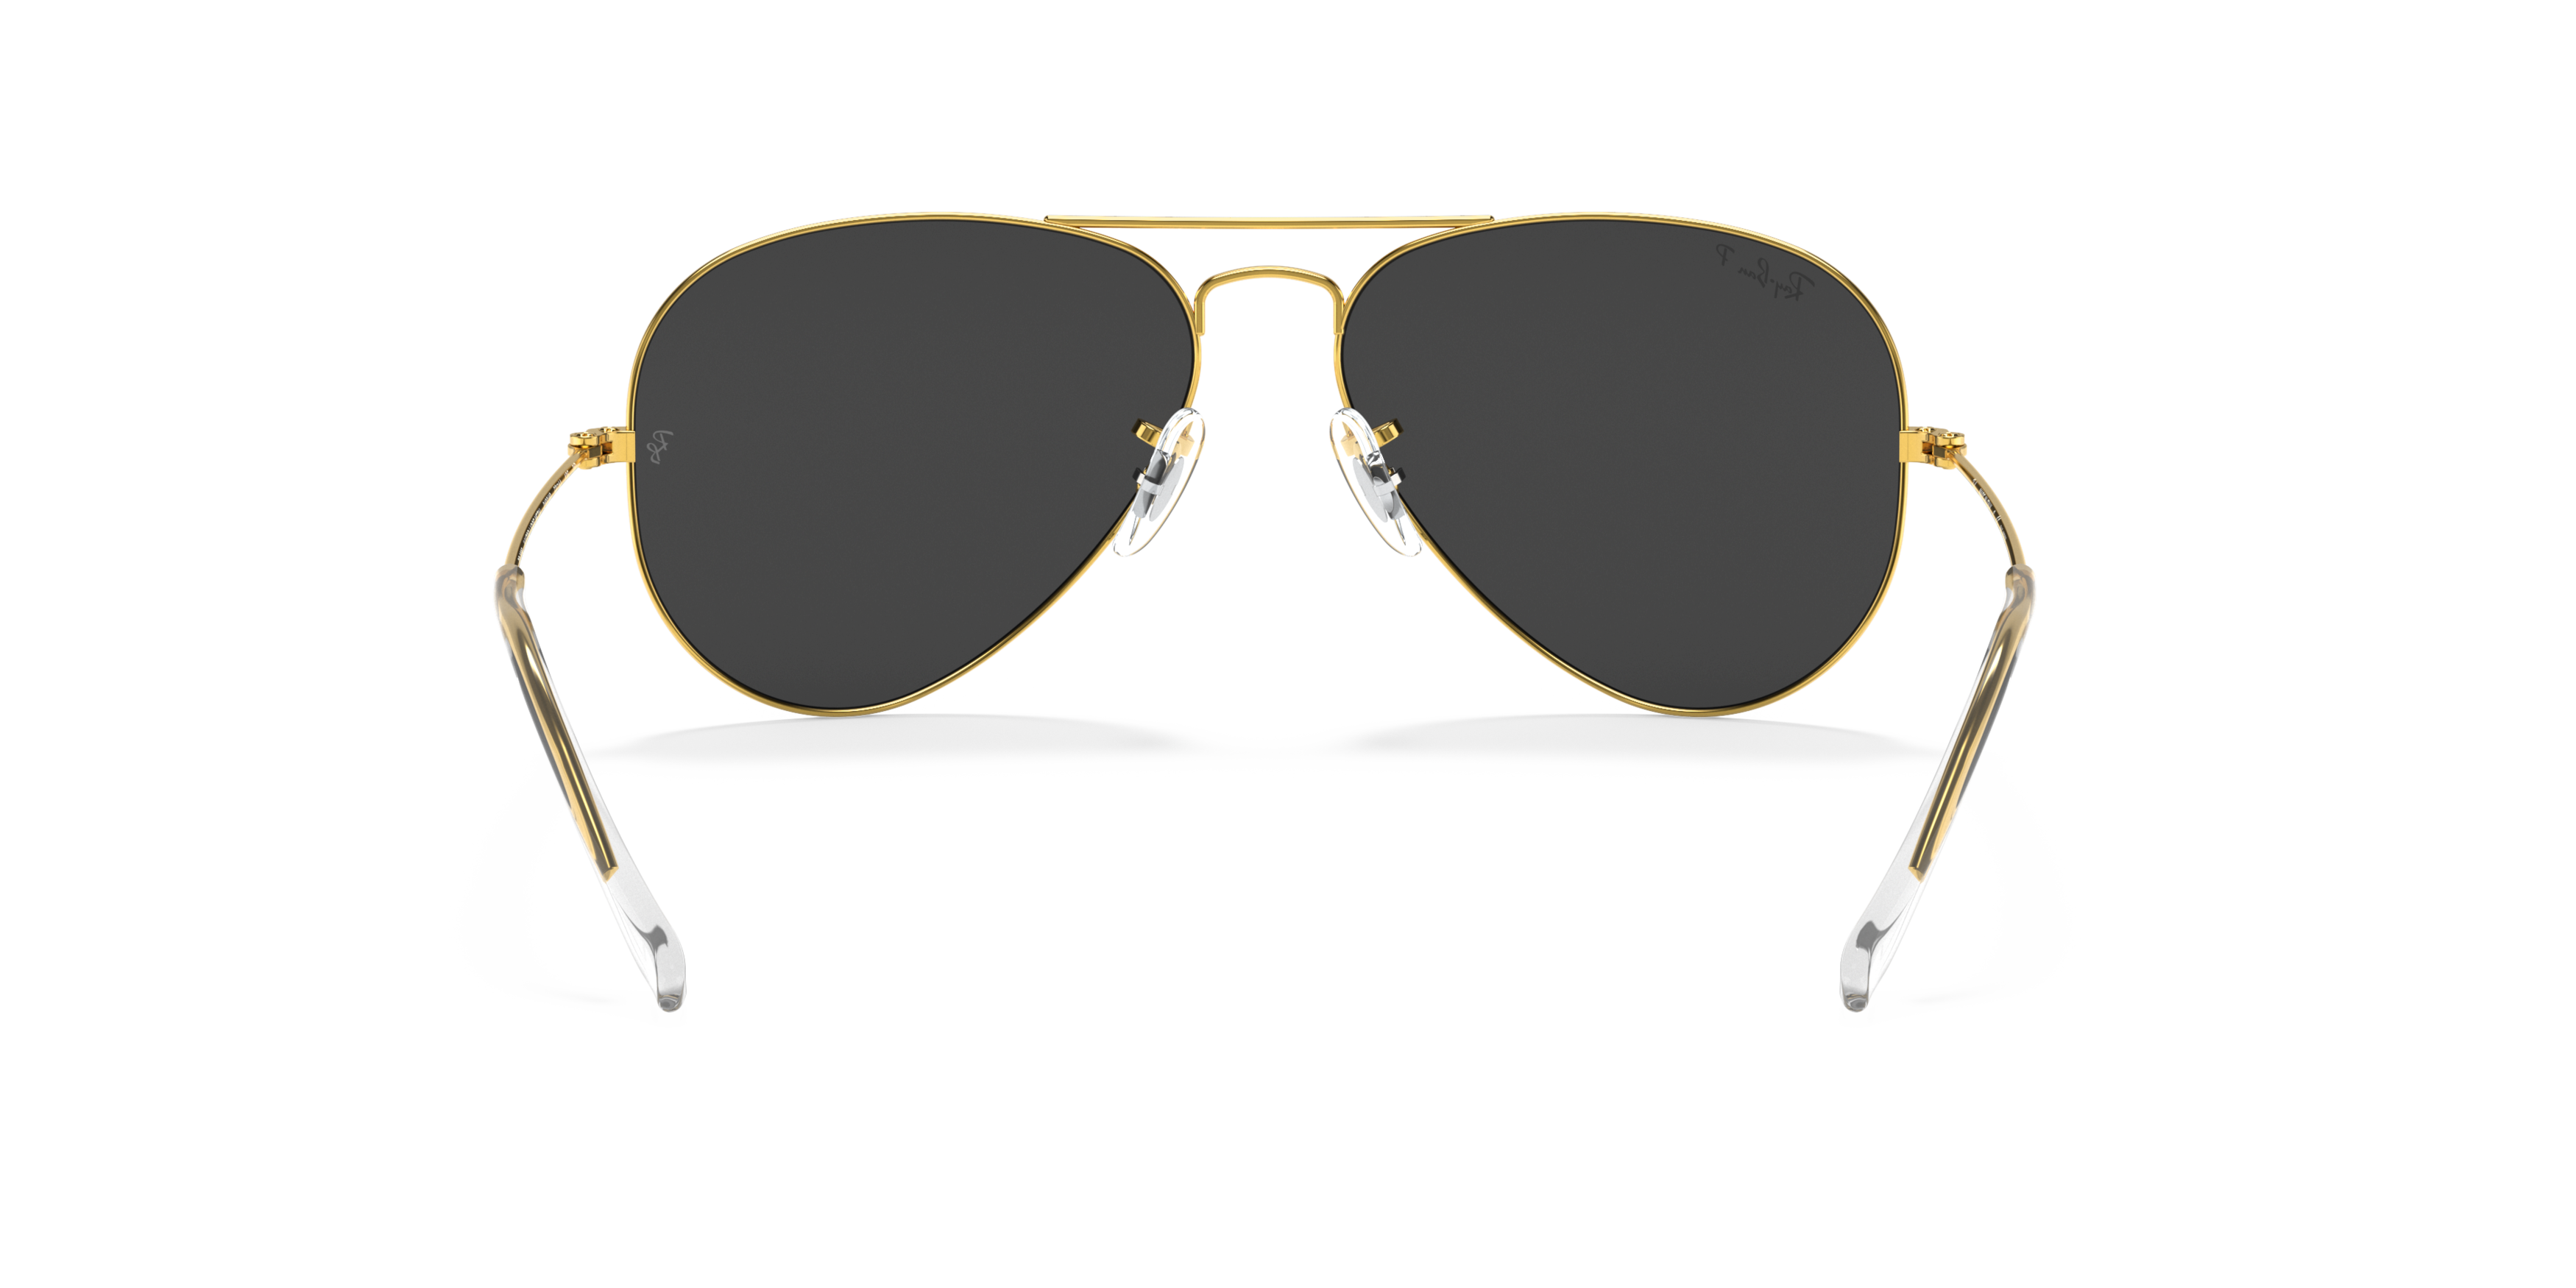 [products.image.detail02] RAY-BAN RB3025 919648